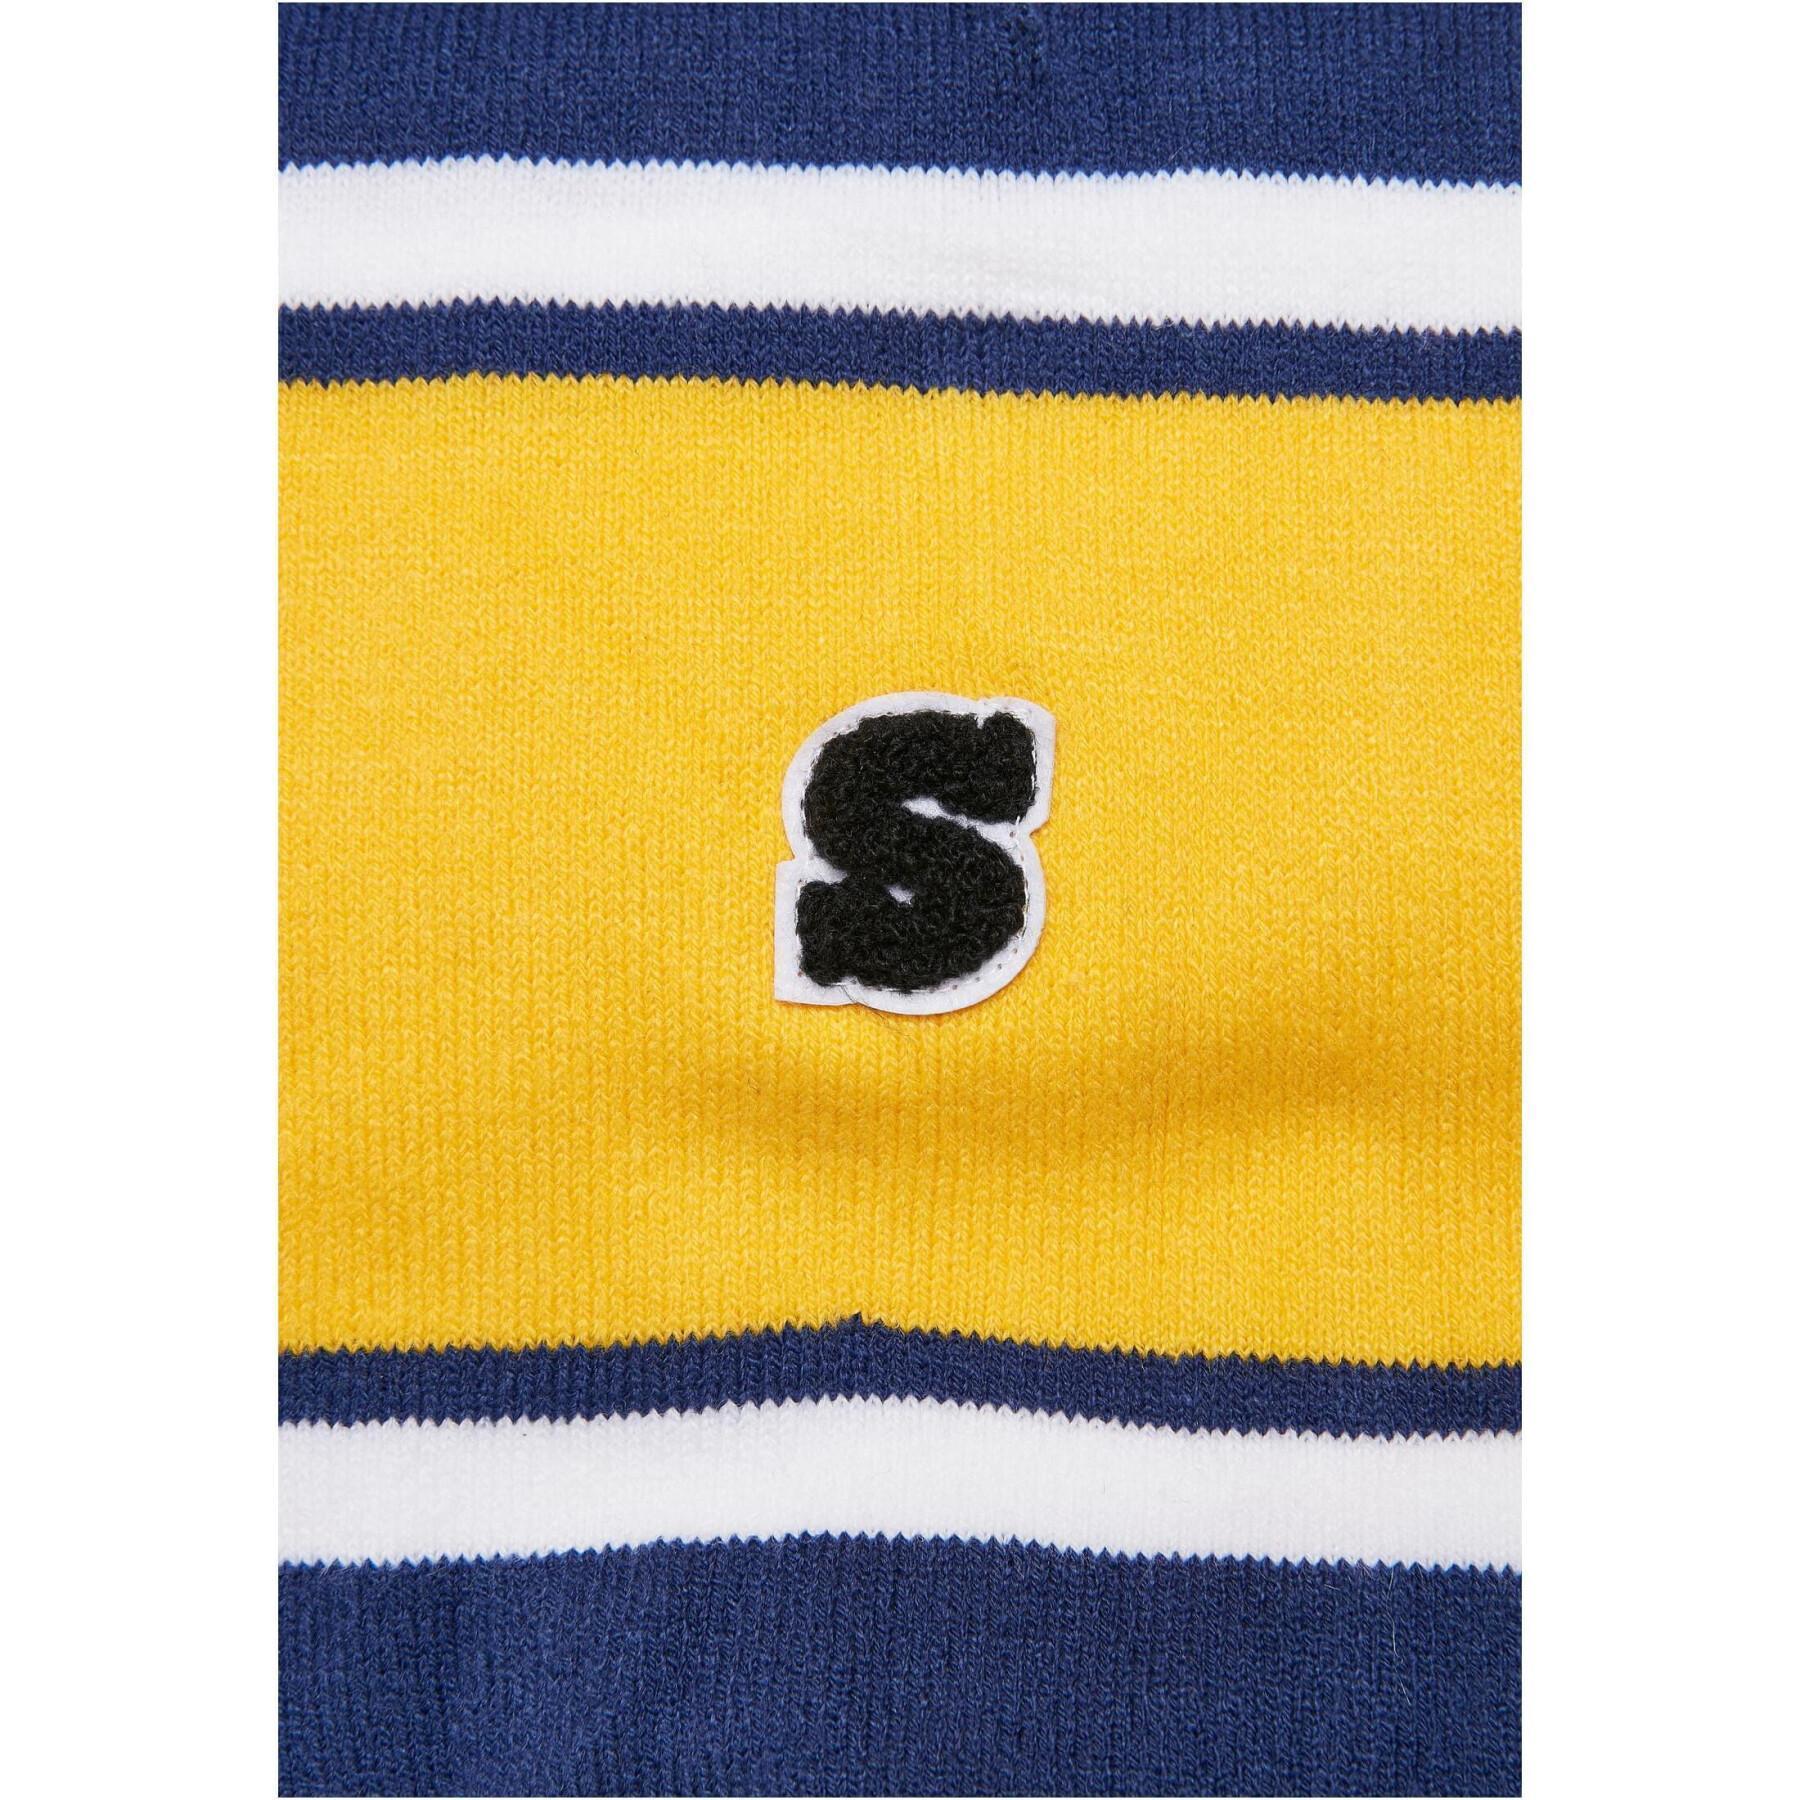 College Beanie Package Classics Urban and Team scarf